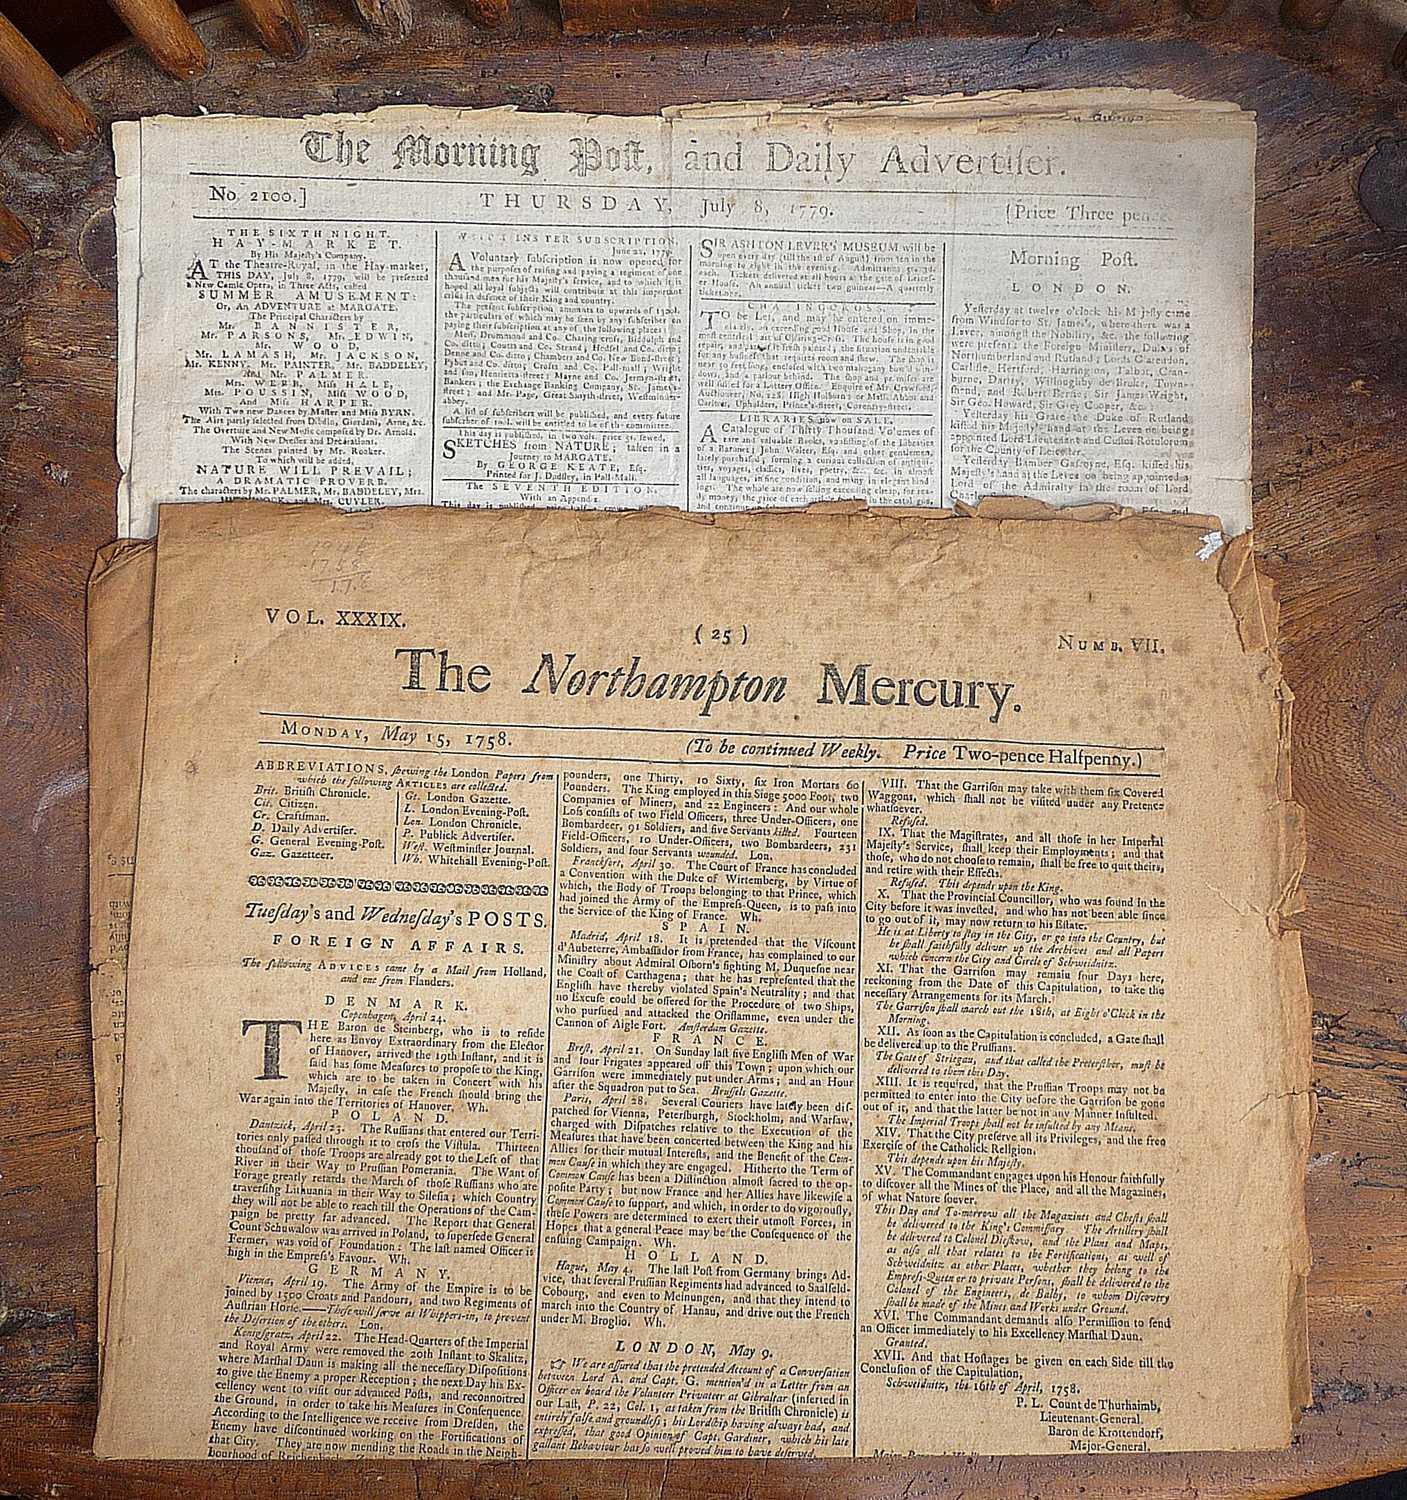 1758 issue of The Northampton Mercury newspaper and a 1779 Morning Post and Advertiser - Image 6 of 6